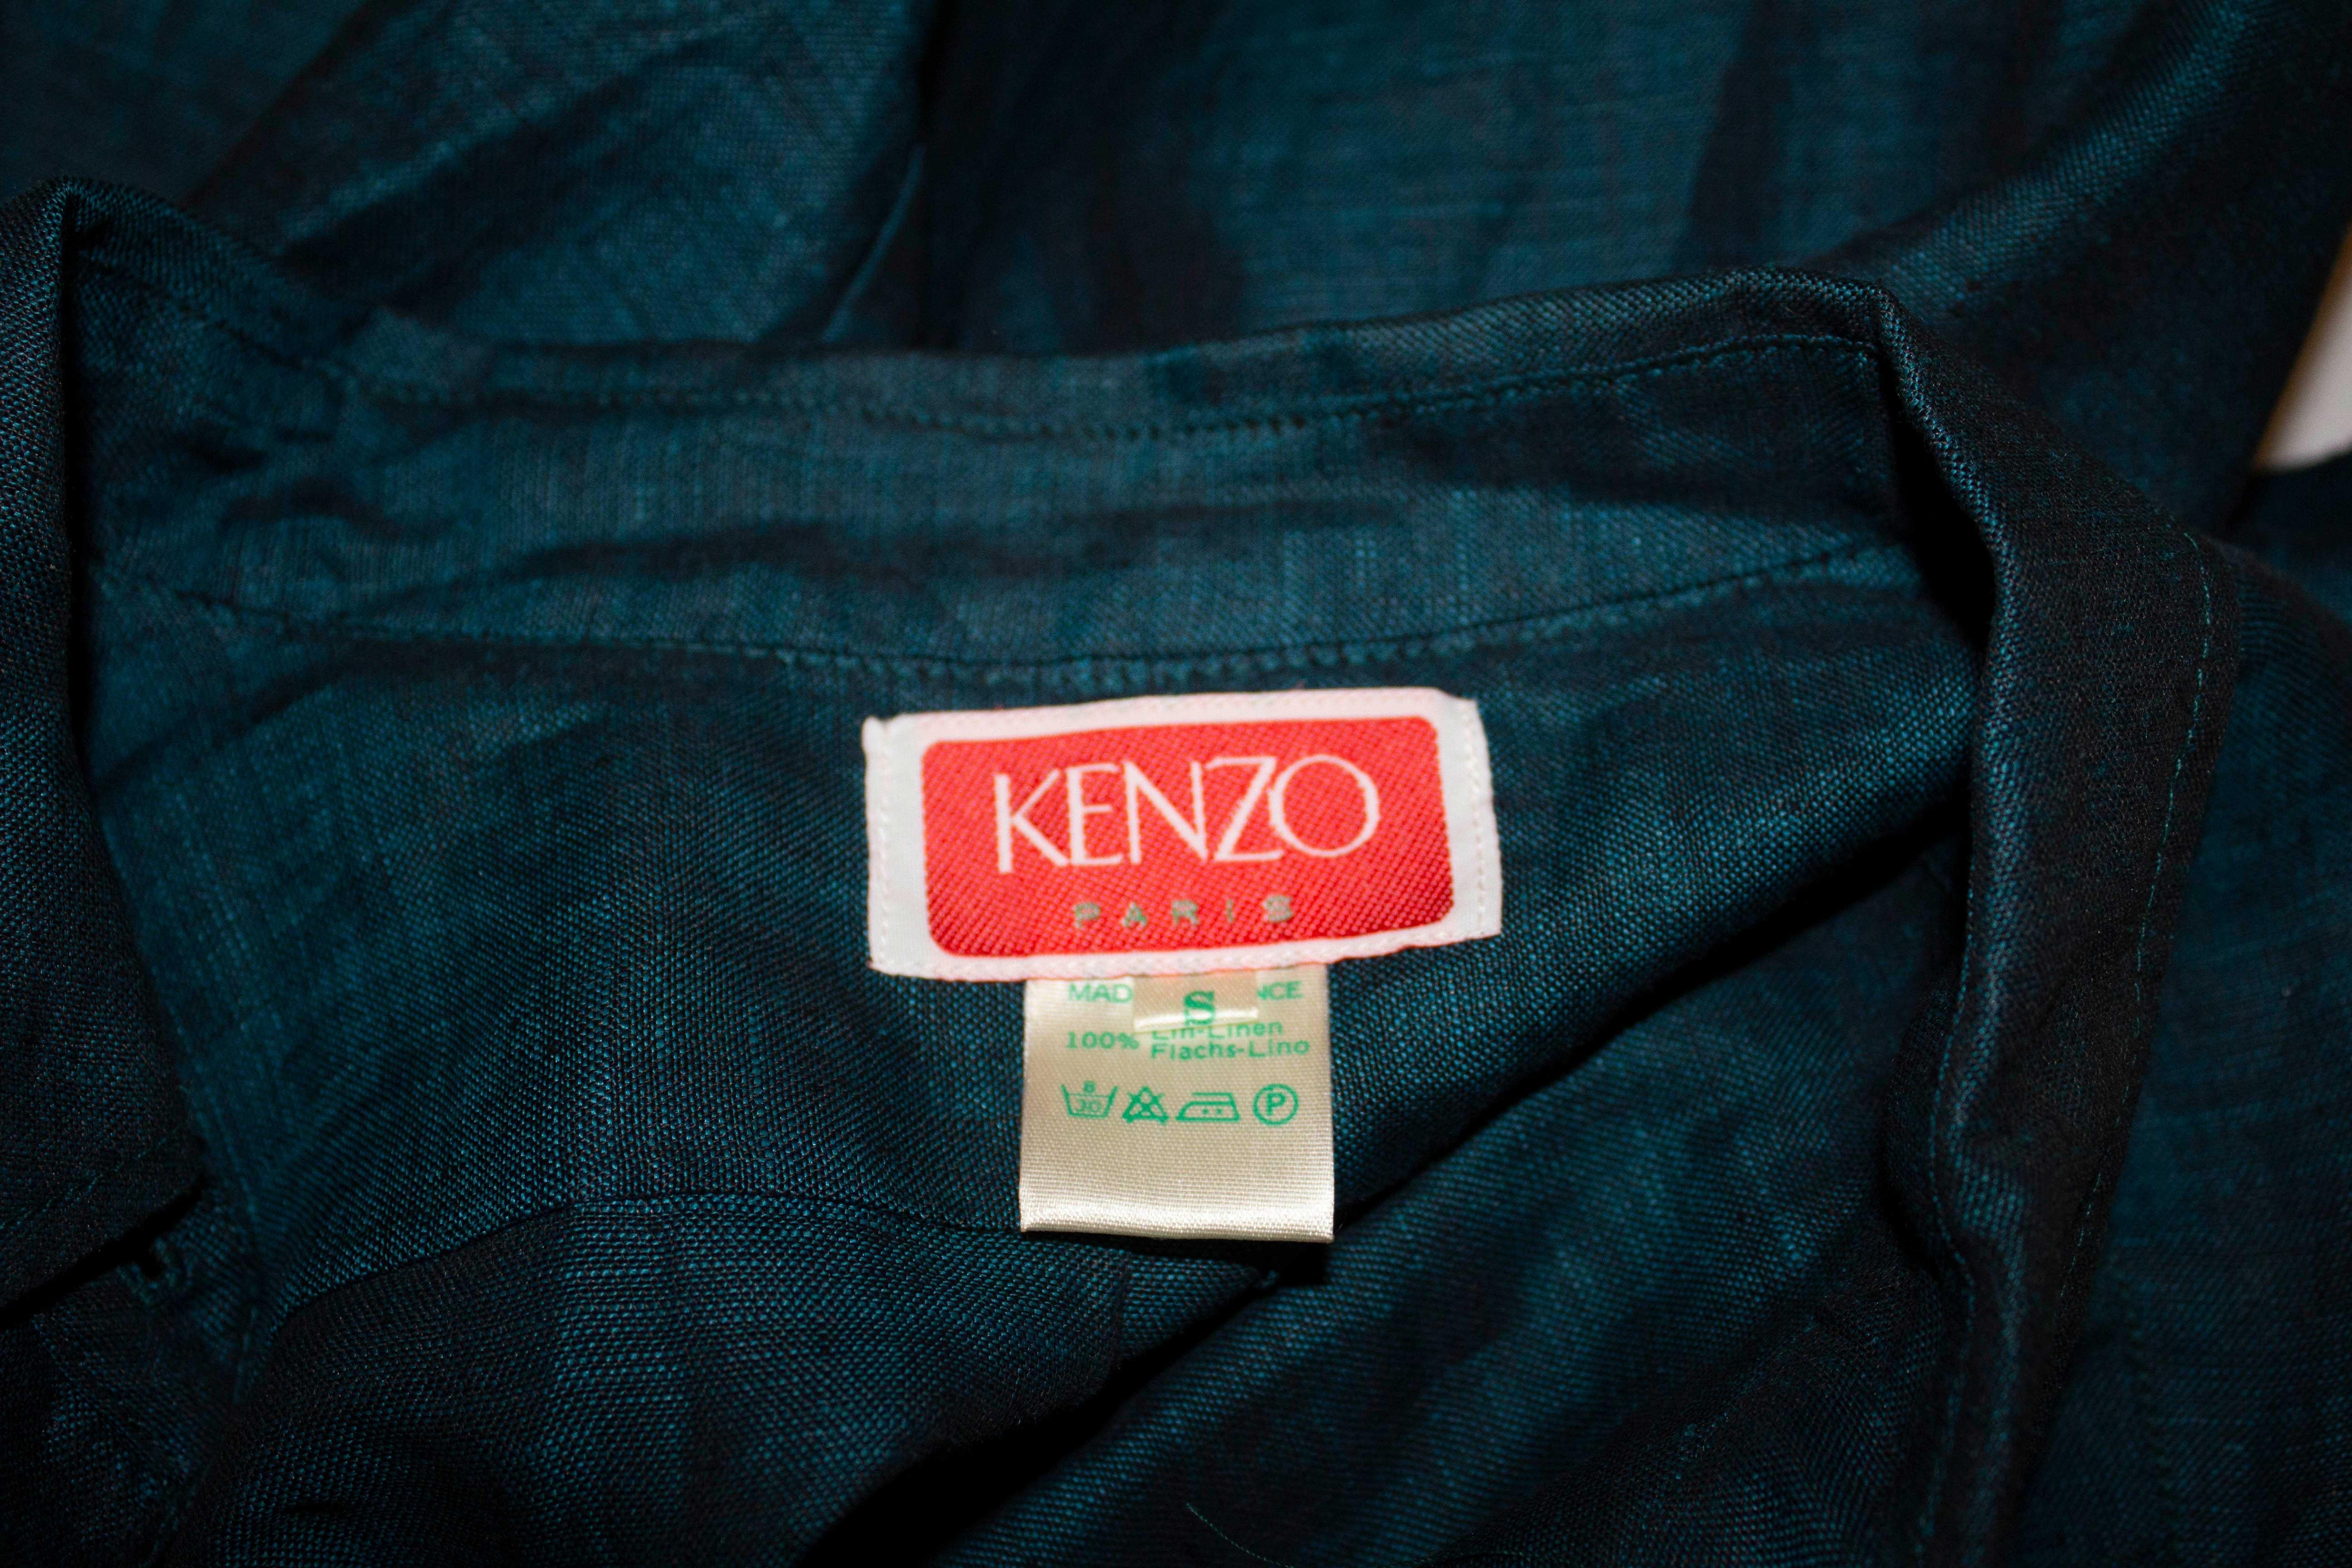 A great vintage shirt with frill detail by Kenzo., Paris. The linen shirt is in a wonderful sea green colour with button front with double ruffle detail, turn back cuffs and a small collar.  Marked size  S. Measurements: Bust 35'', length 24''